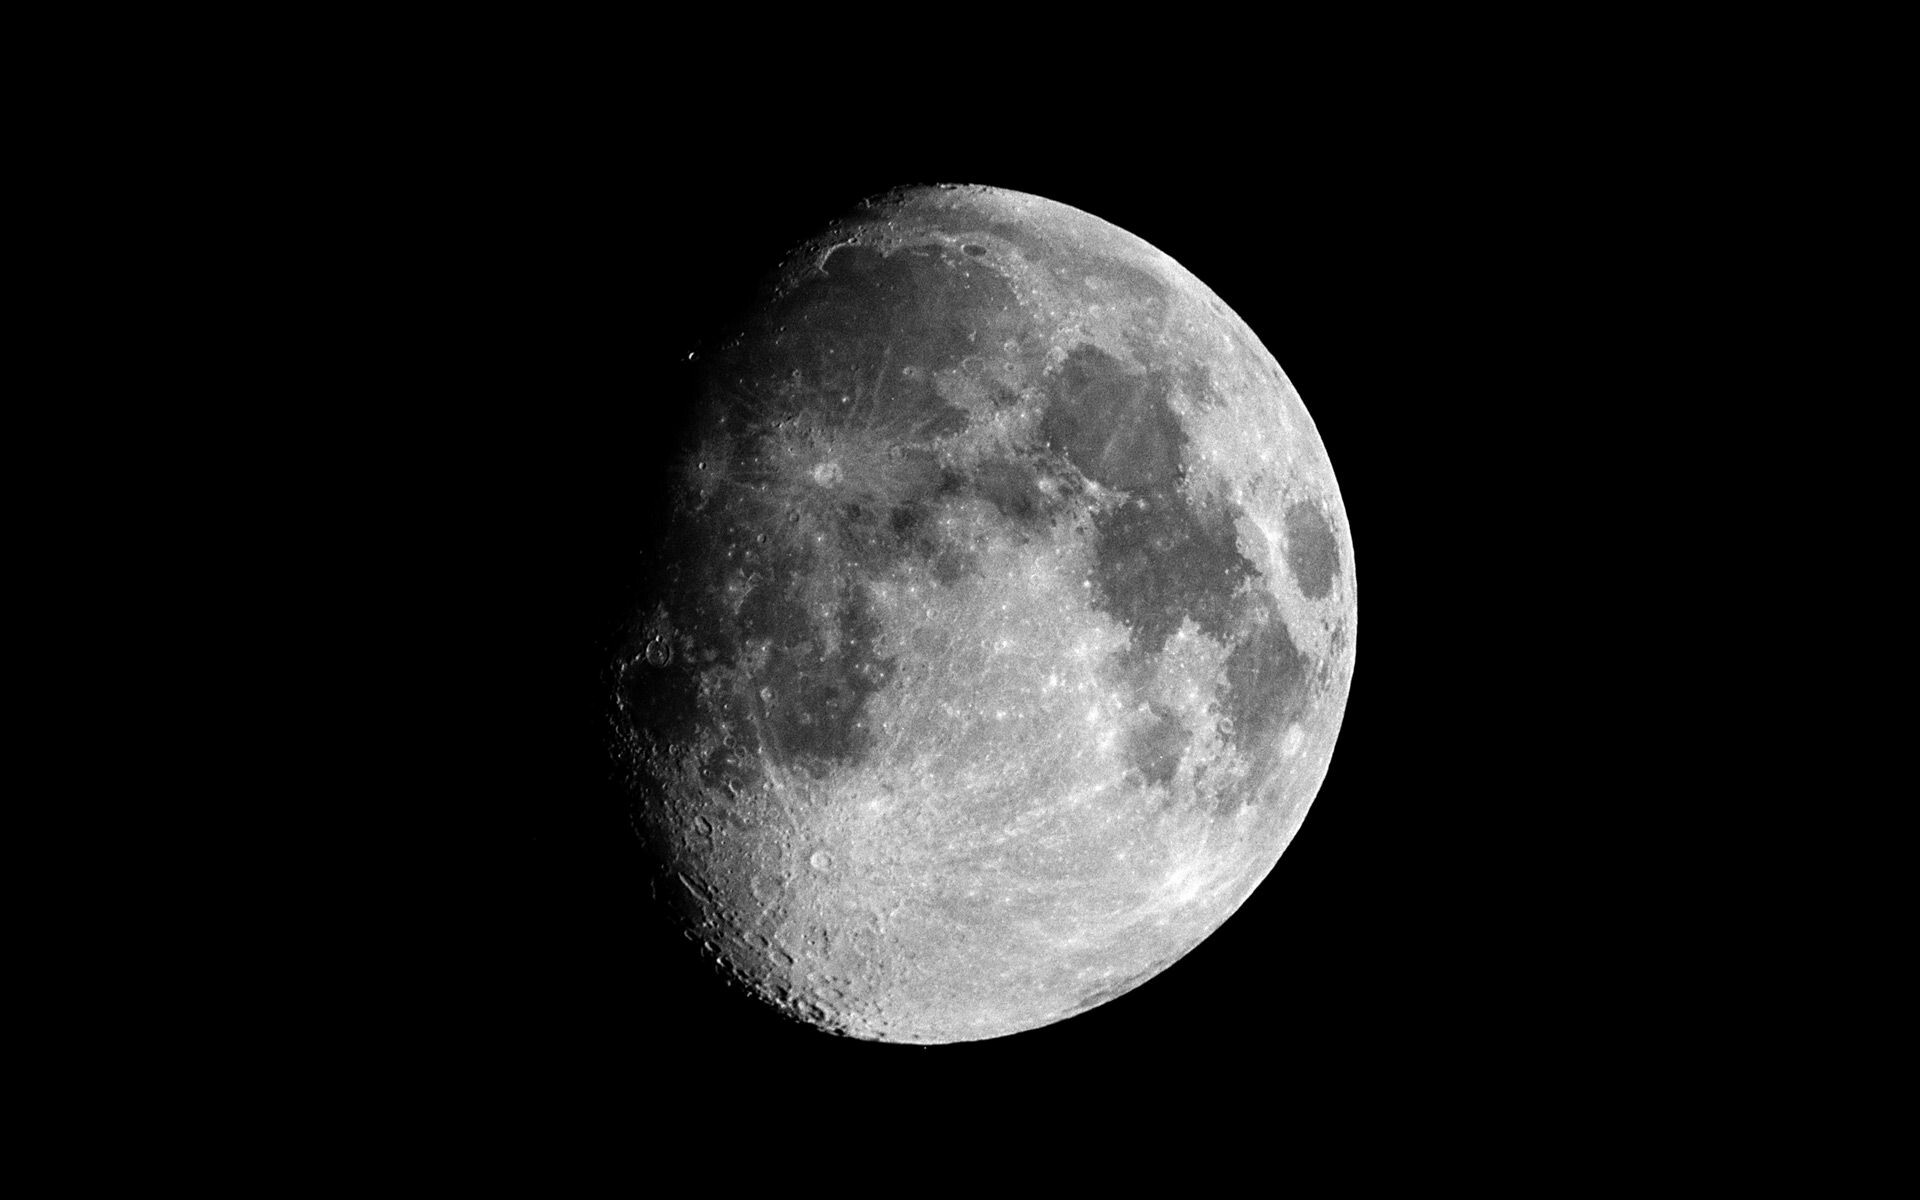 Moon Desktop Wallpaper: HD, 4K, 5K for PC and Mobile. Download free image for iPhone, Android